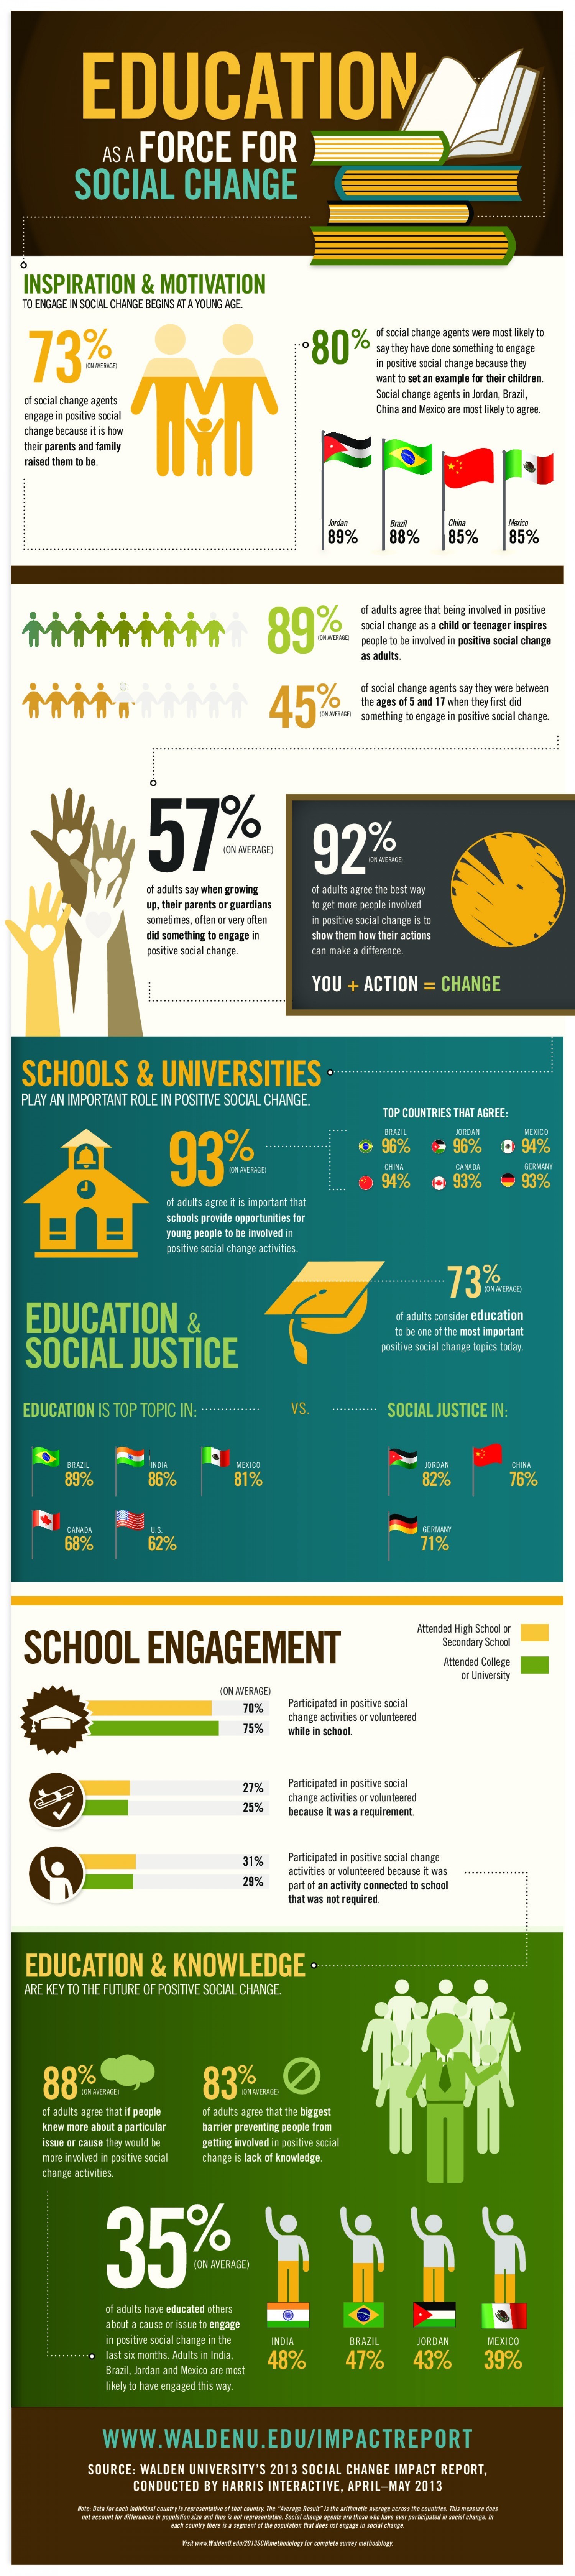 Education and Social Change Infographic